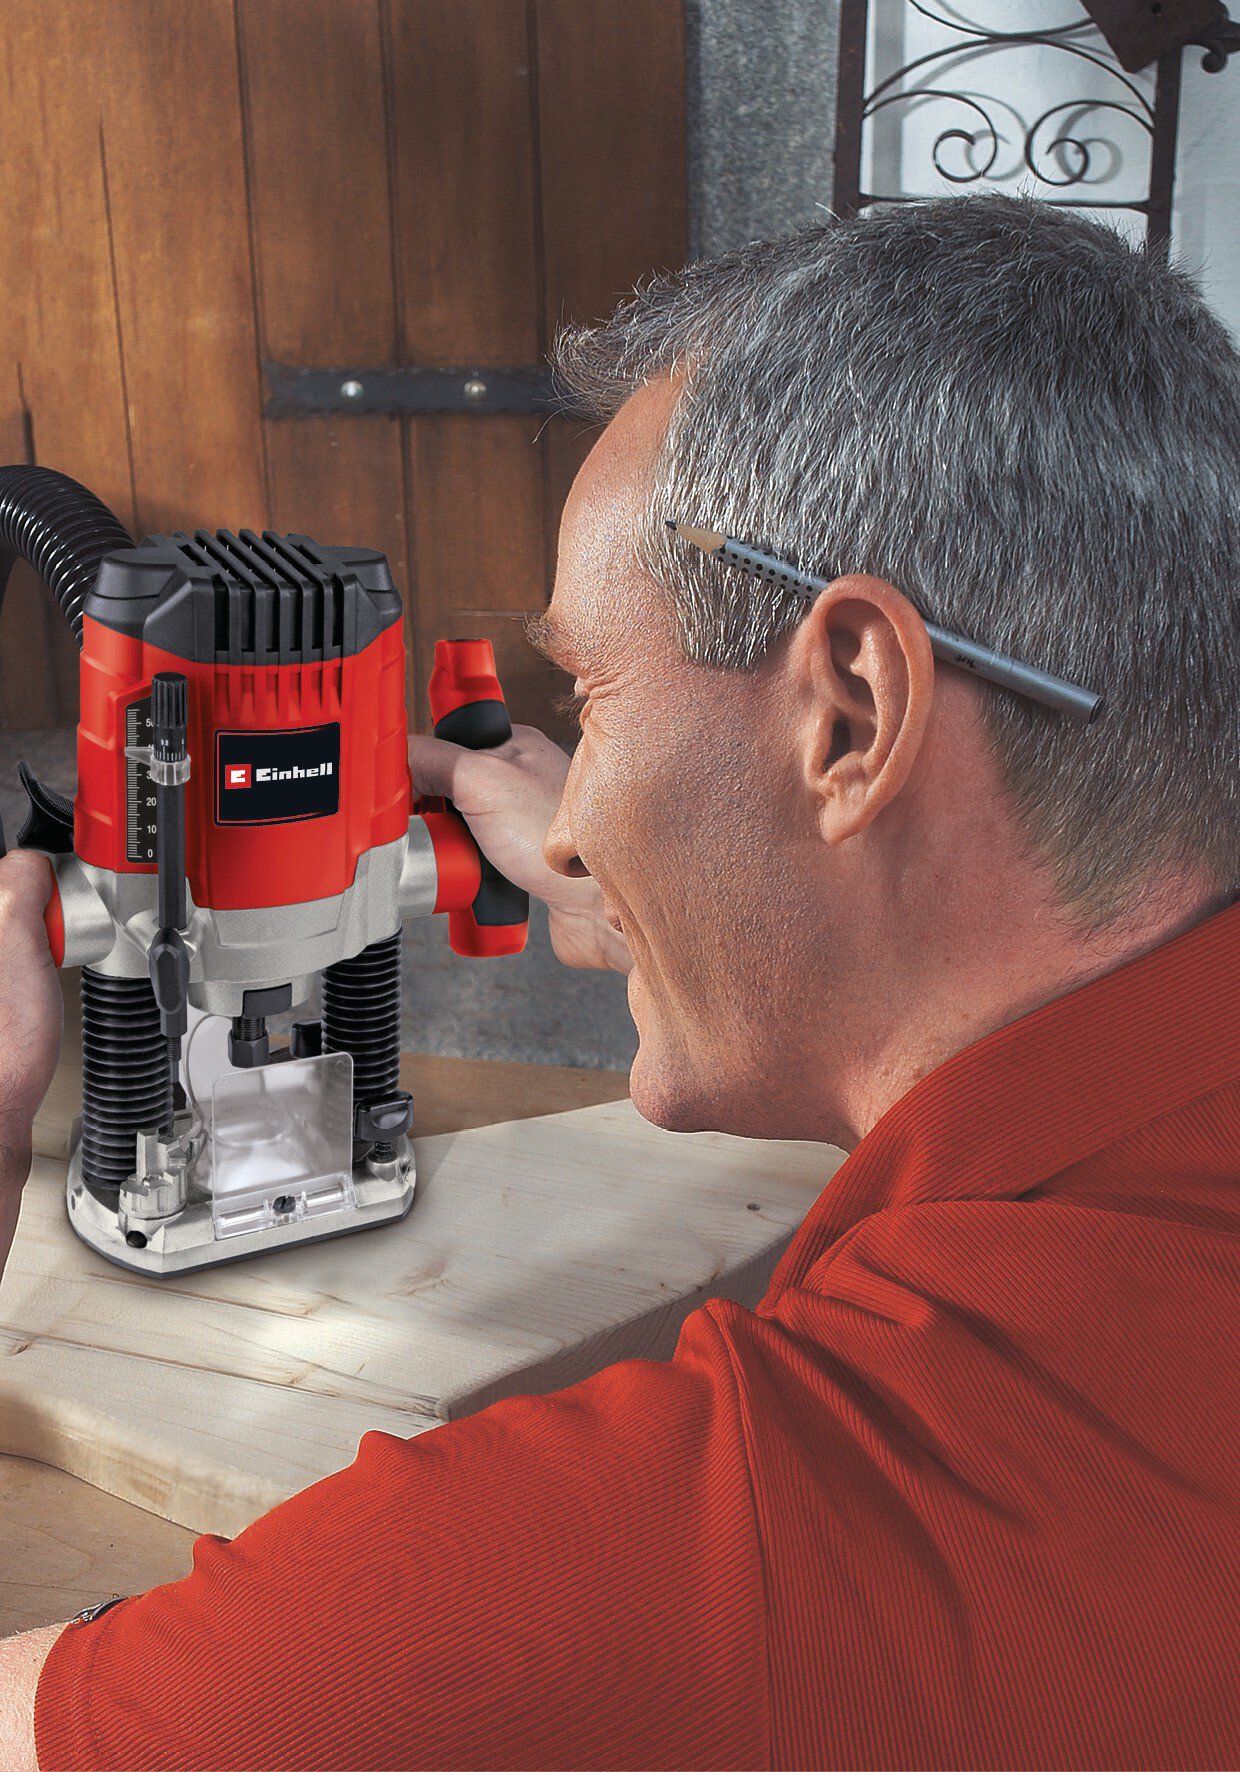 einhell-classic-router-4350470-example_usage-001